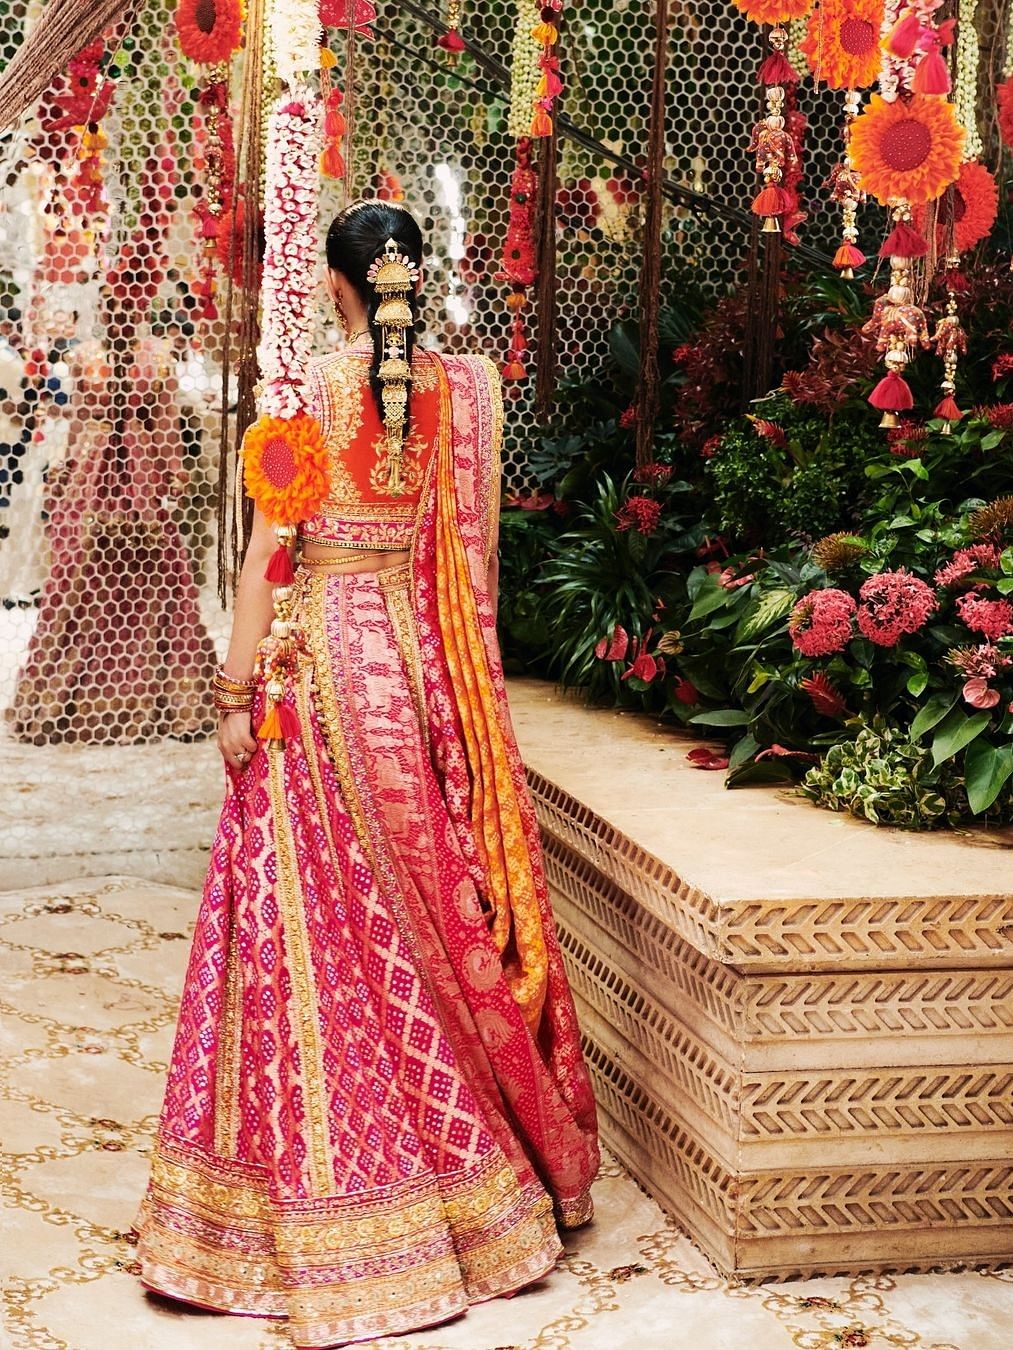 The lehenga was embroidered with Durga Maa shlokas and 35 meters of bandhej fabric were used to create the ghagra.